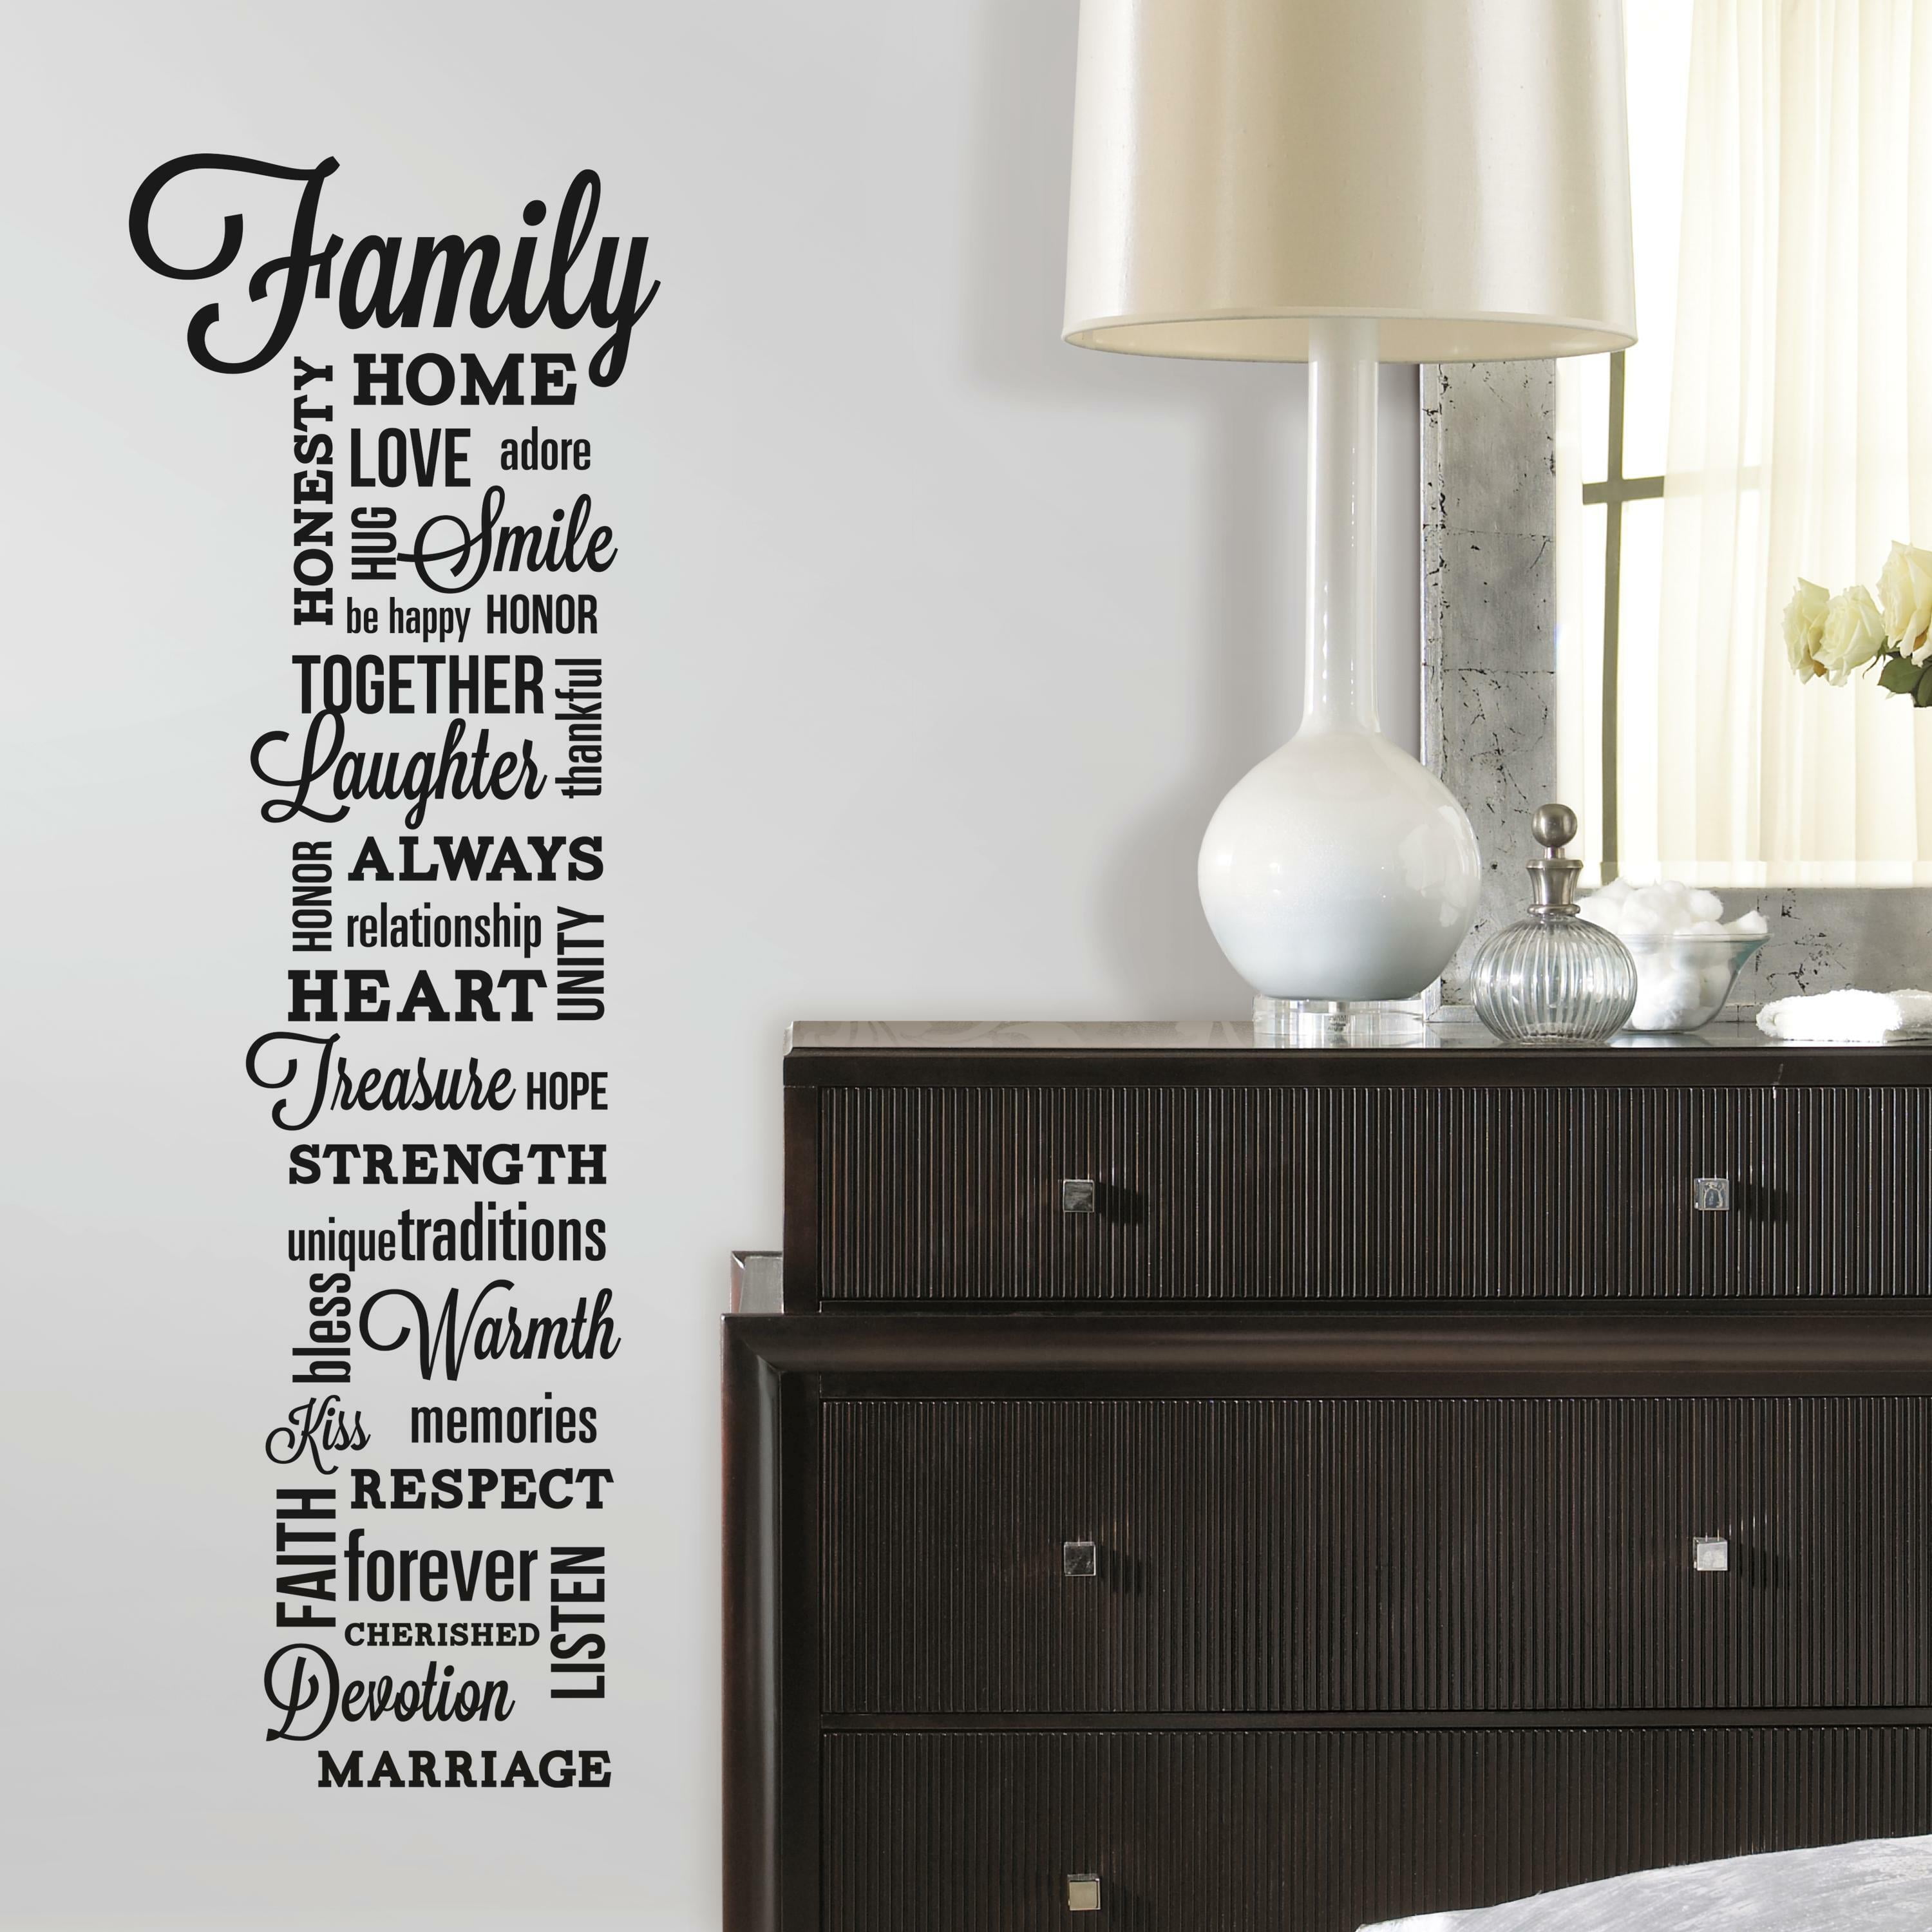 10 x 20 Black Design with Vinyl Moti 1988 1 Family Inspirational Life Quote Living Room Bedroom Peel & Stick Wall Sticker Decal